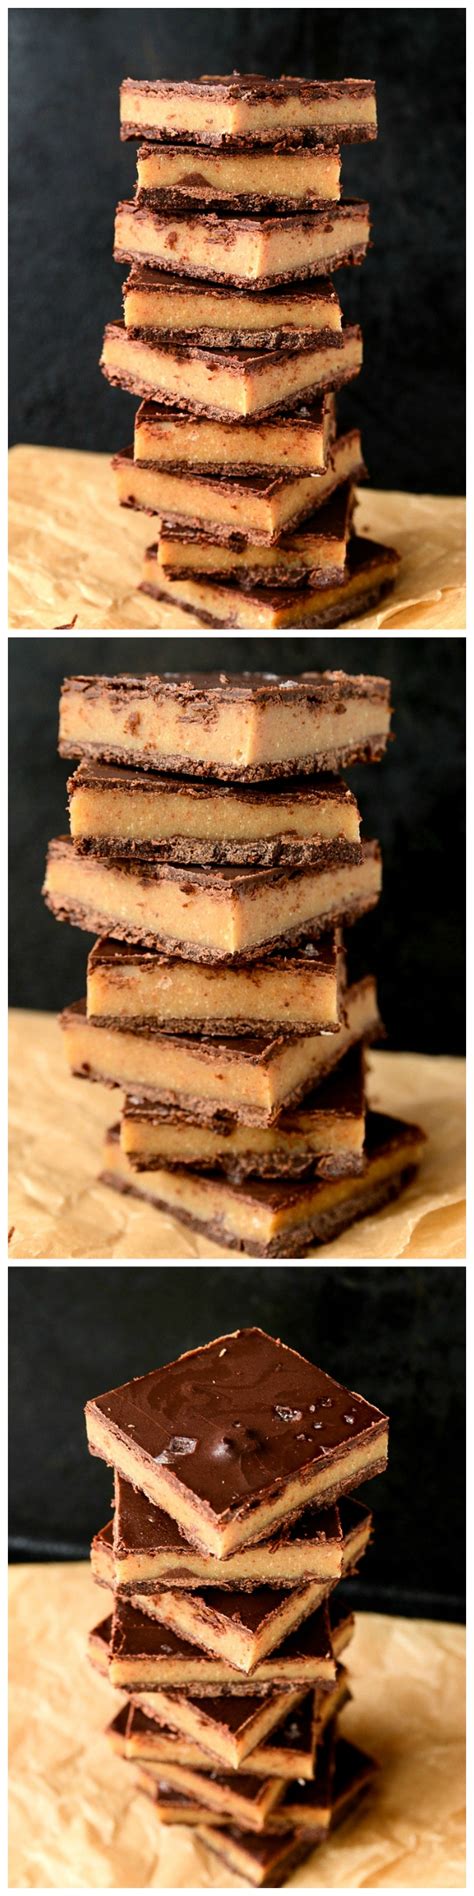 6 Ingredient Chocolate And Caramel Slices A Healthy And Easy Dessert Snack To Make This